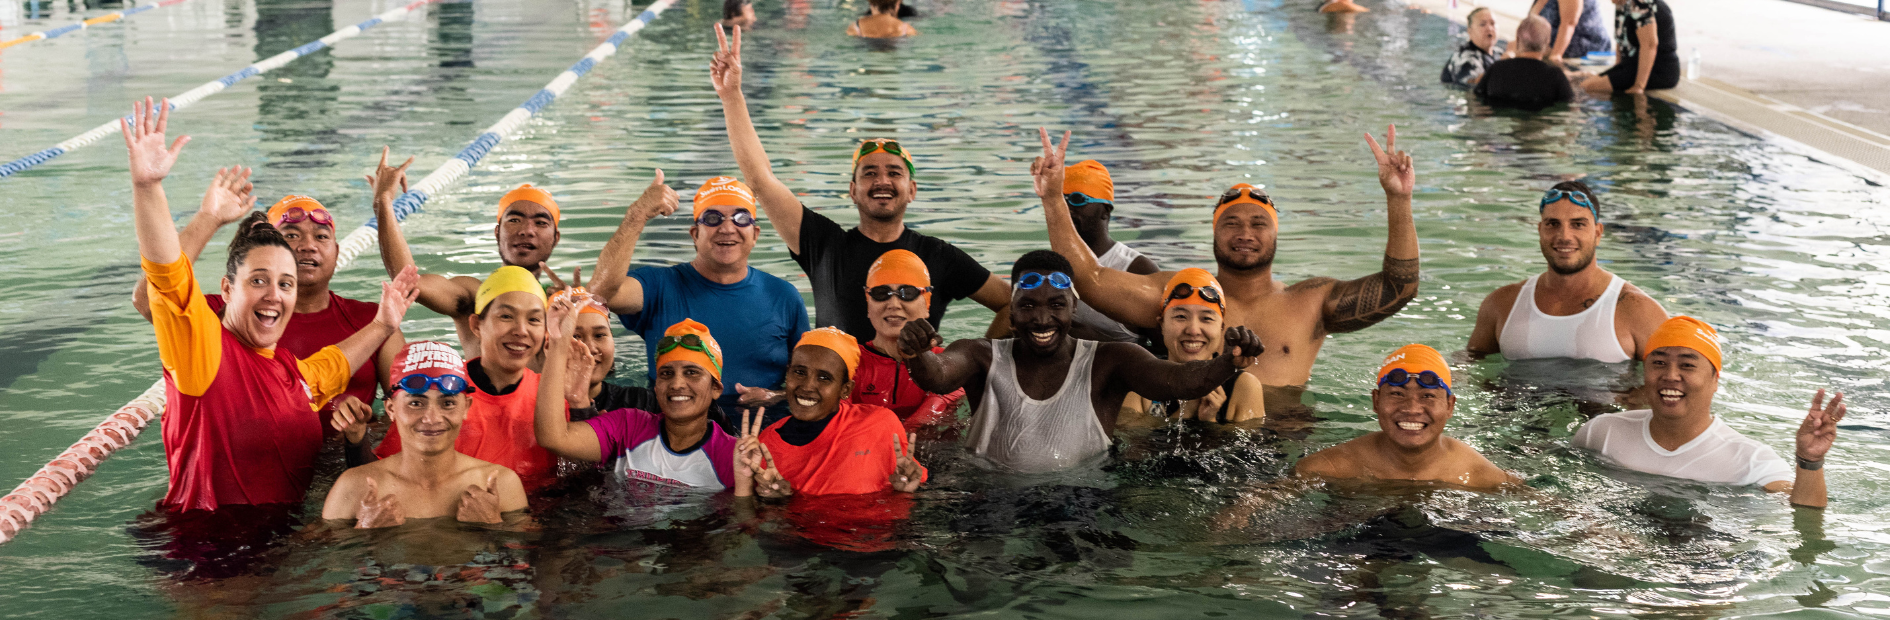 A large diverse group of people smiling and posing together while in the pool